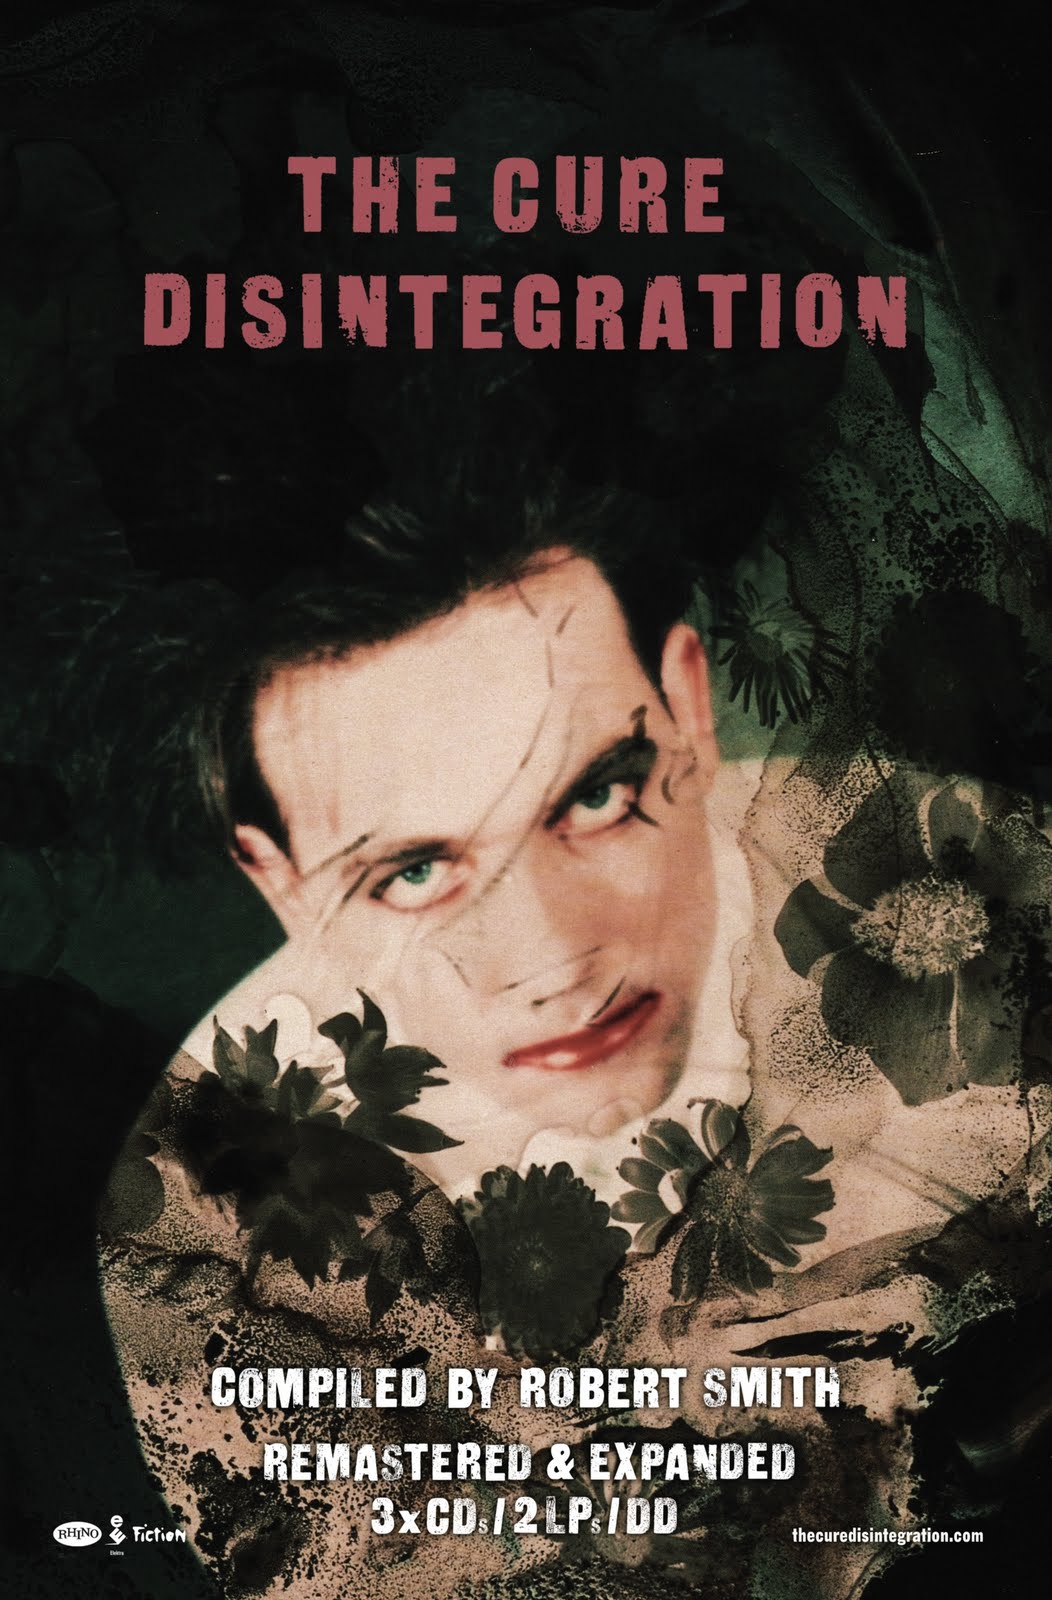 Contest: Win The Cure’s 3CD ‘Disintegration: Deluxe Edition,’ promo sampler and poster